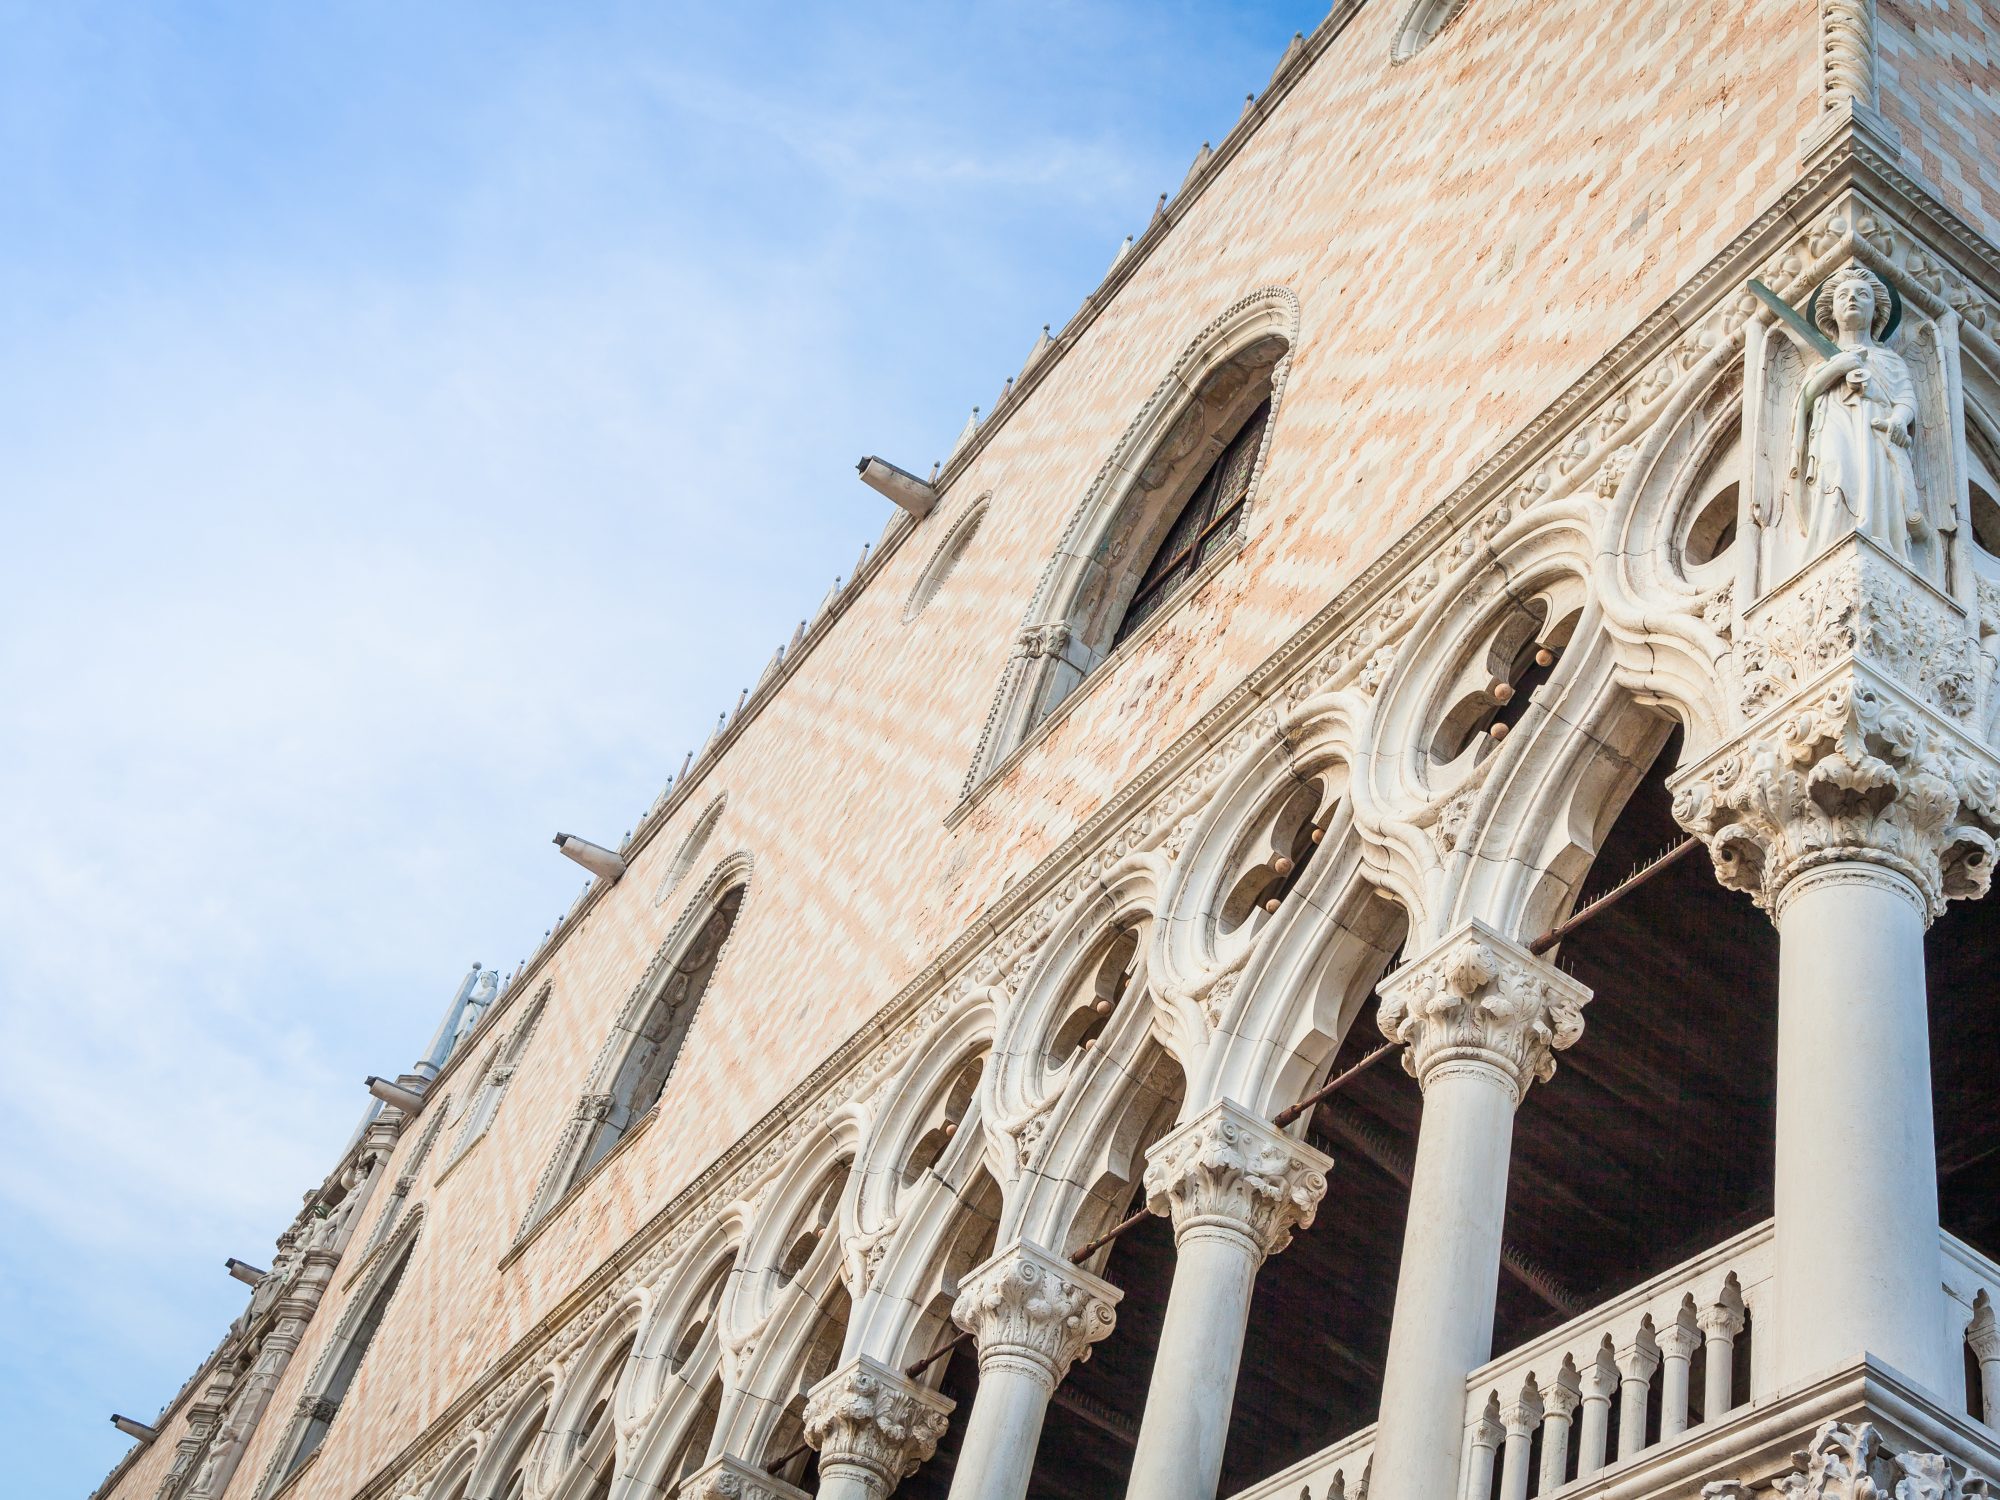 Detail of the most famous landmark of Venice - Palazzo Ducale